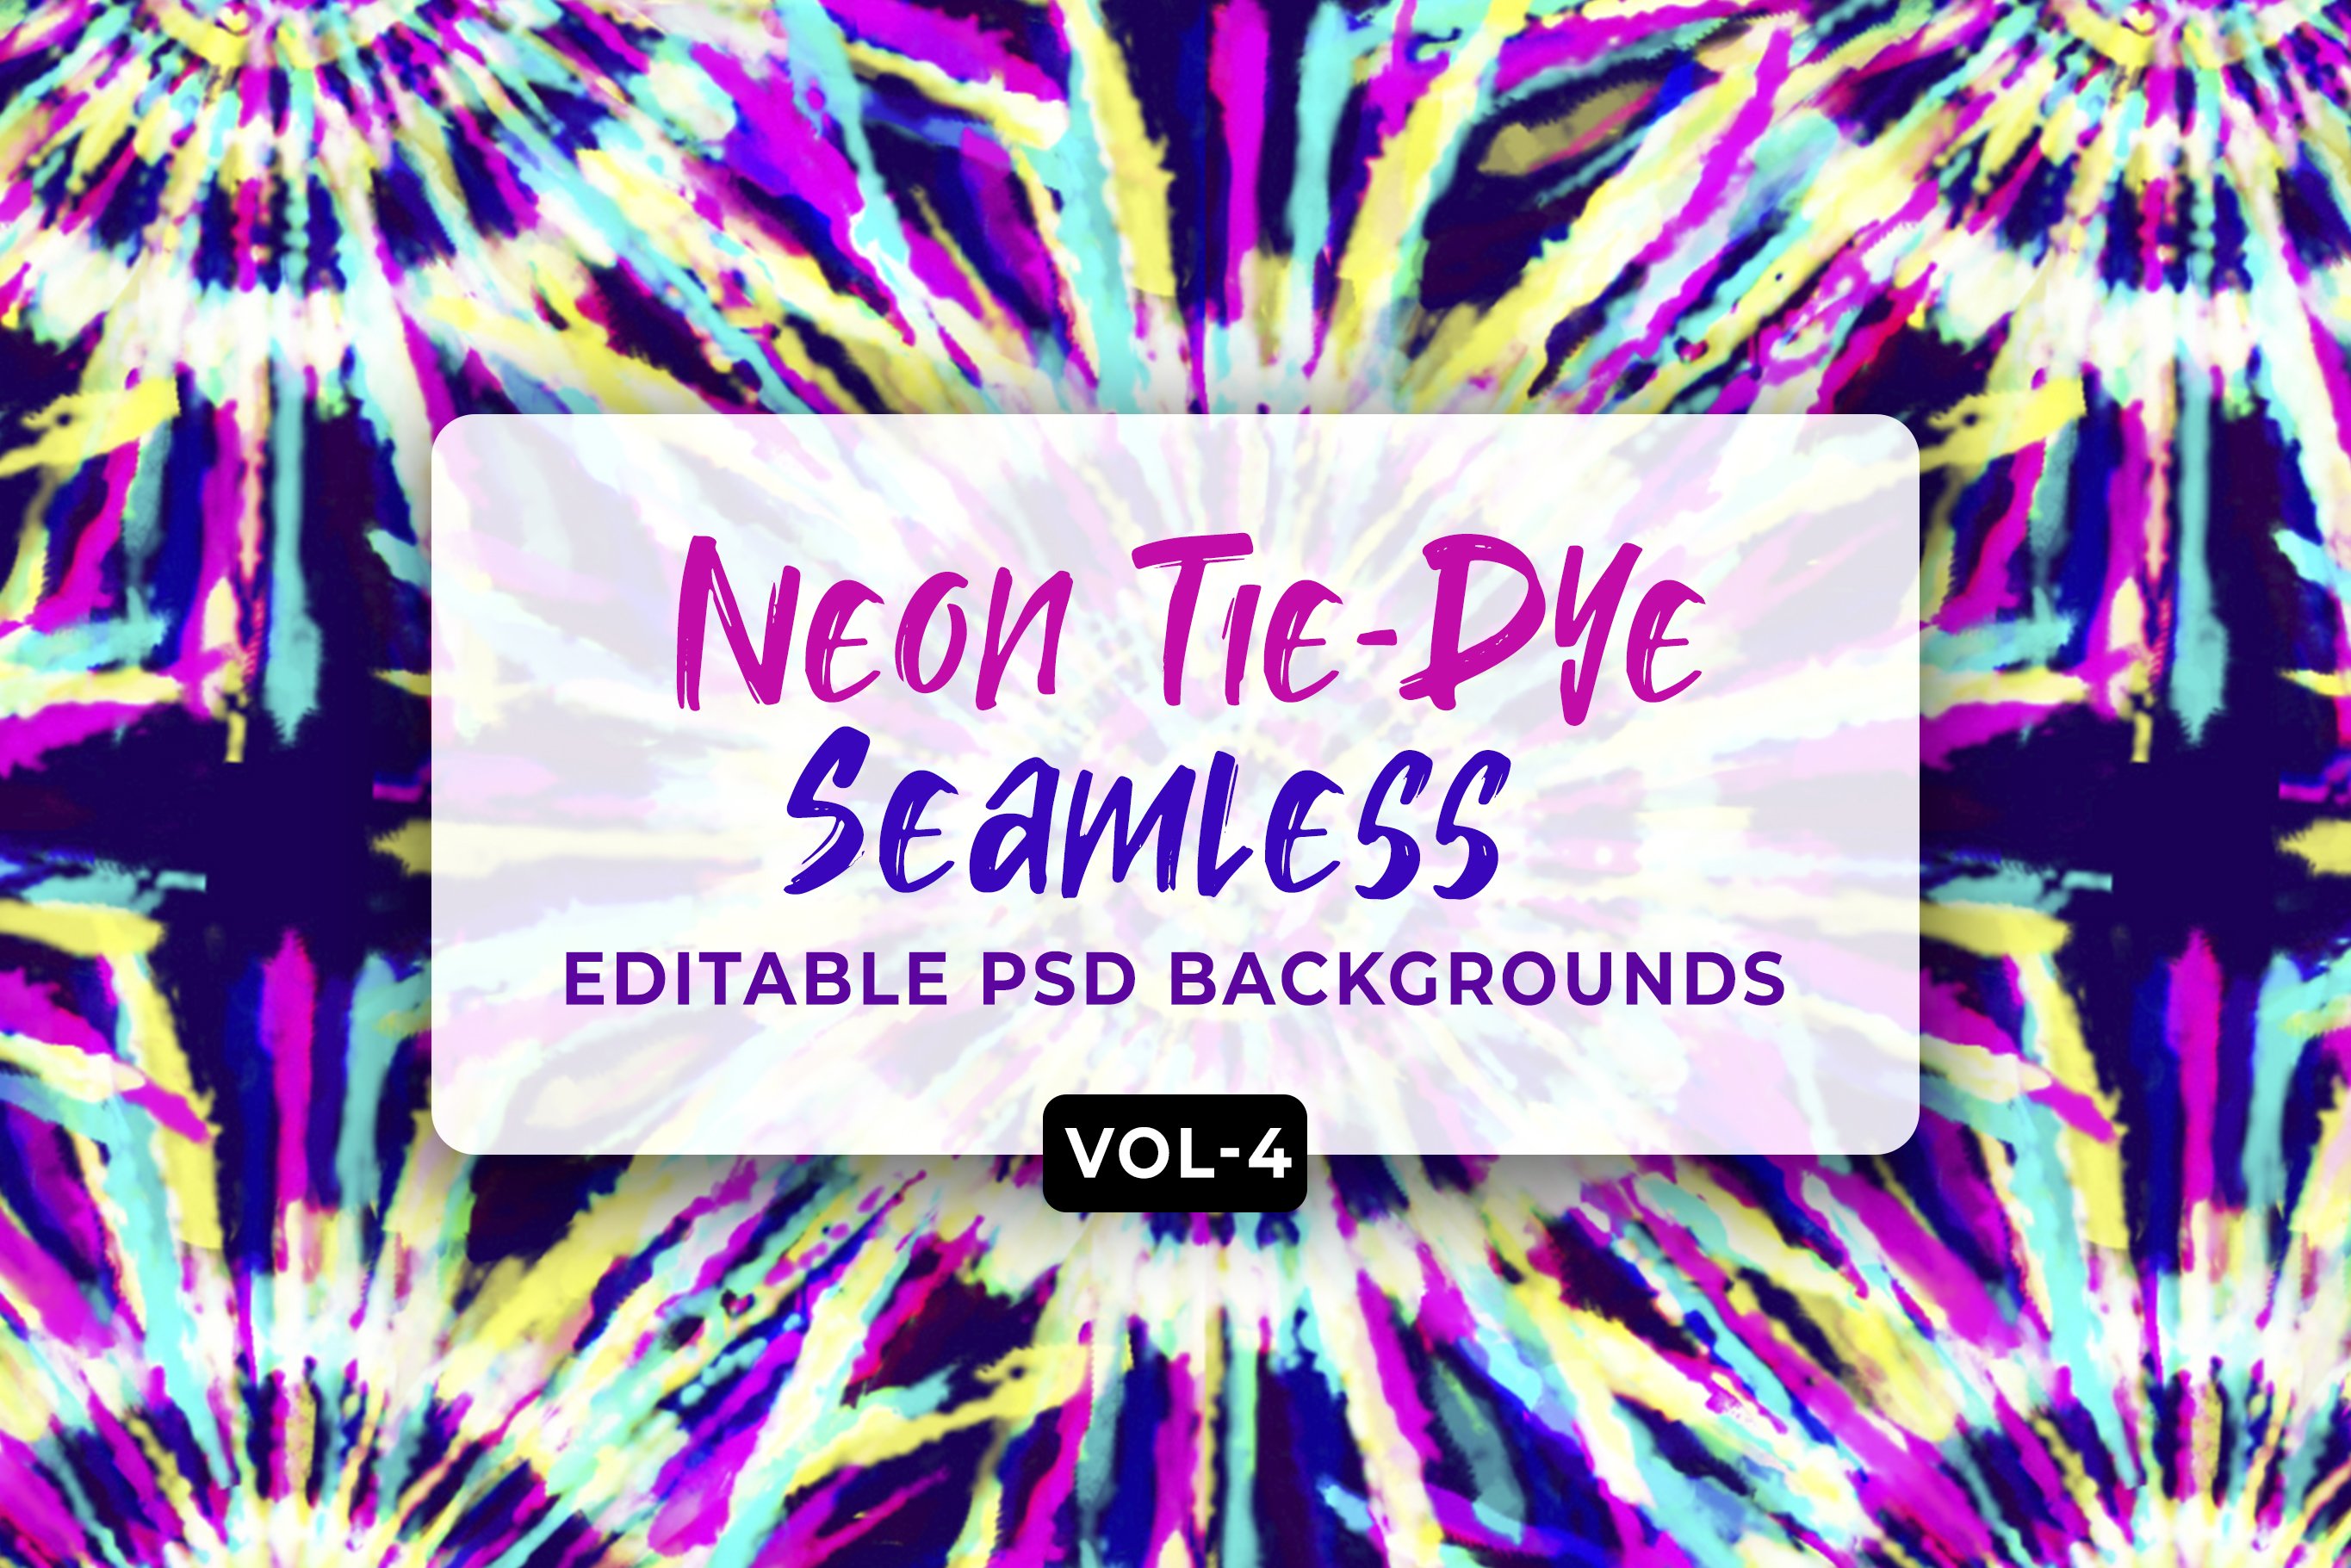 Neon Tie-Dye Seamless Patterns V-04 cover image.